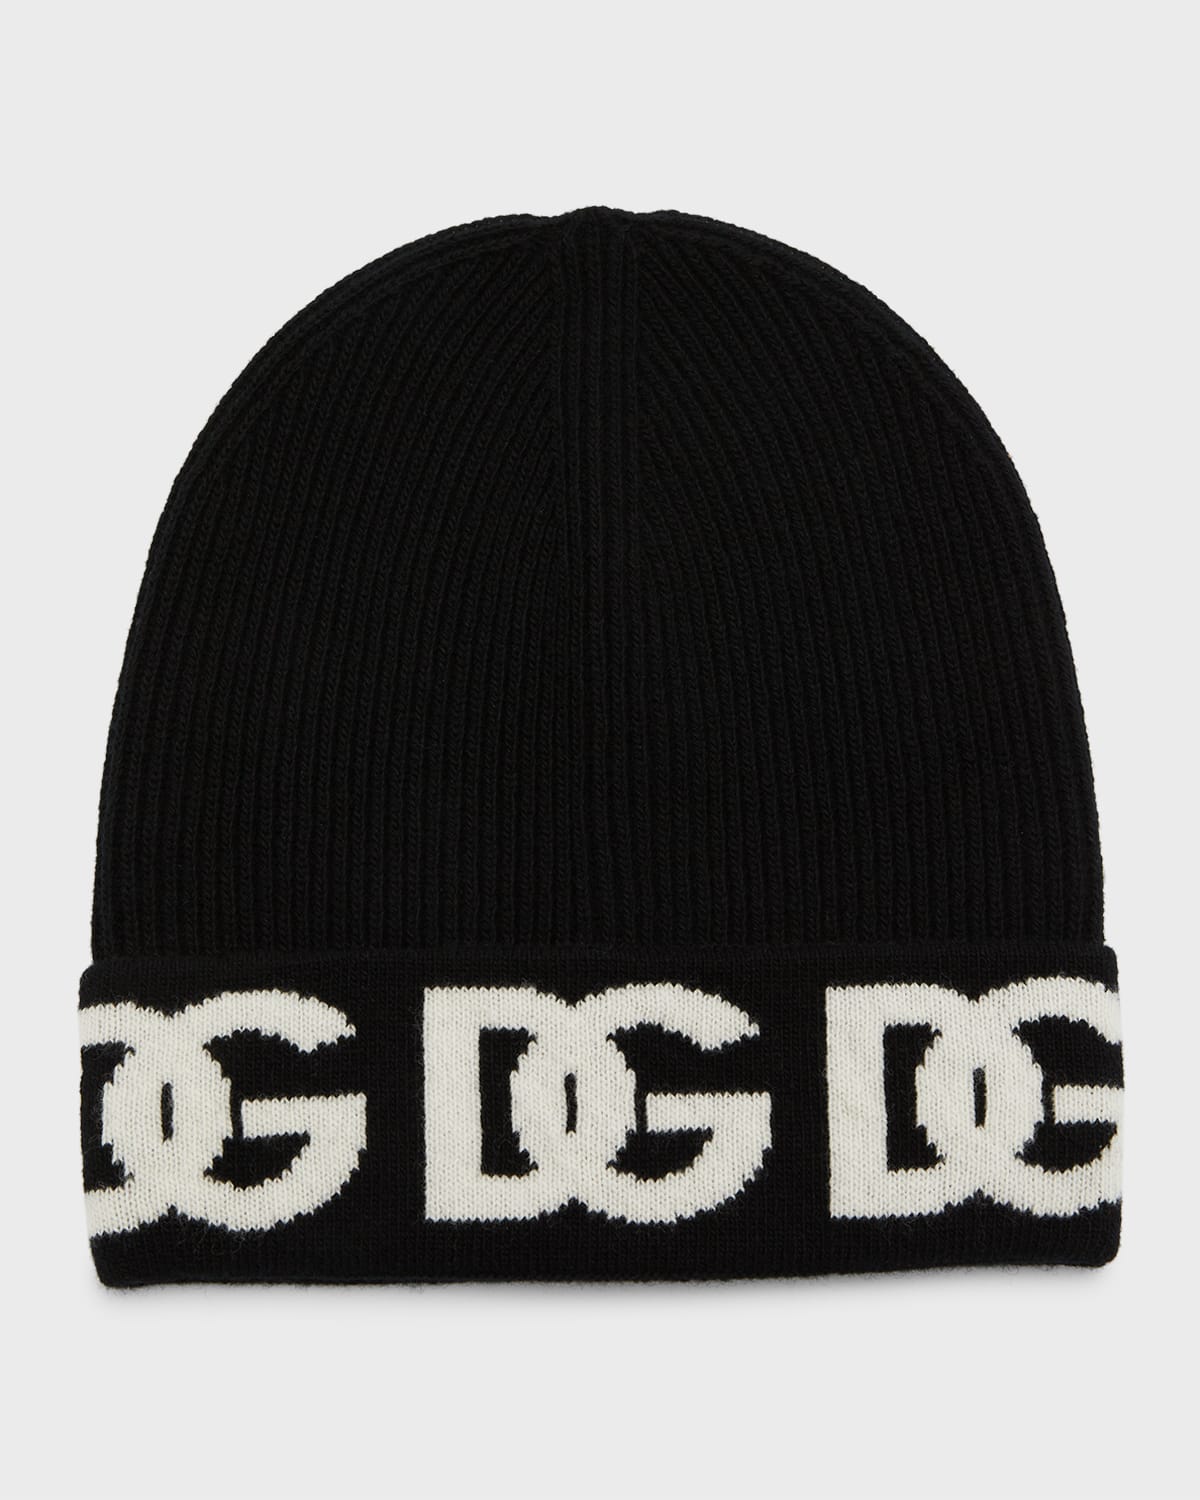 Kid's Embroidered Logo Knit Hat, Size S-L